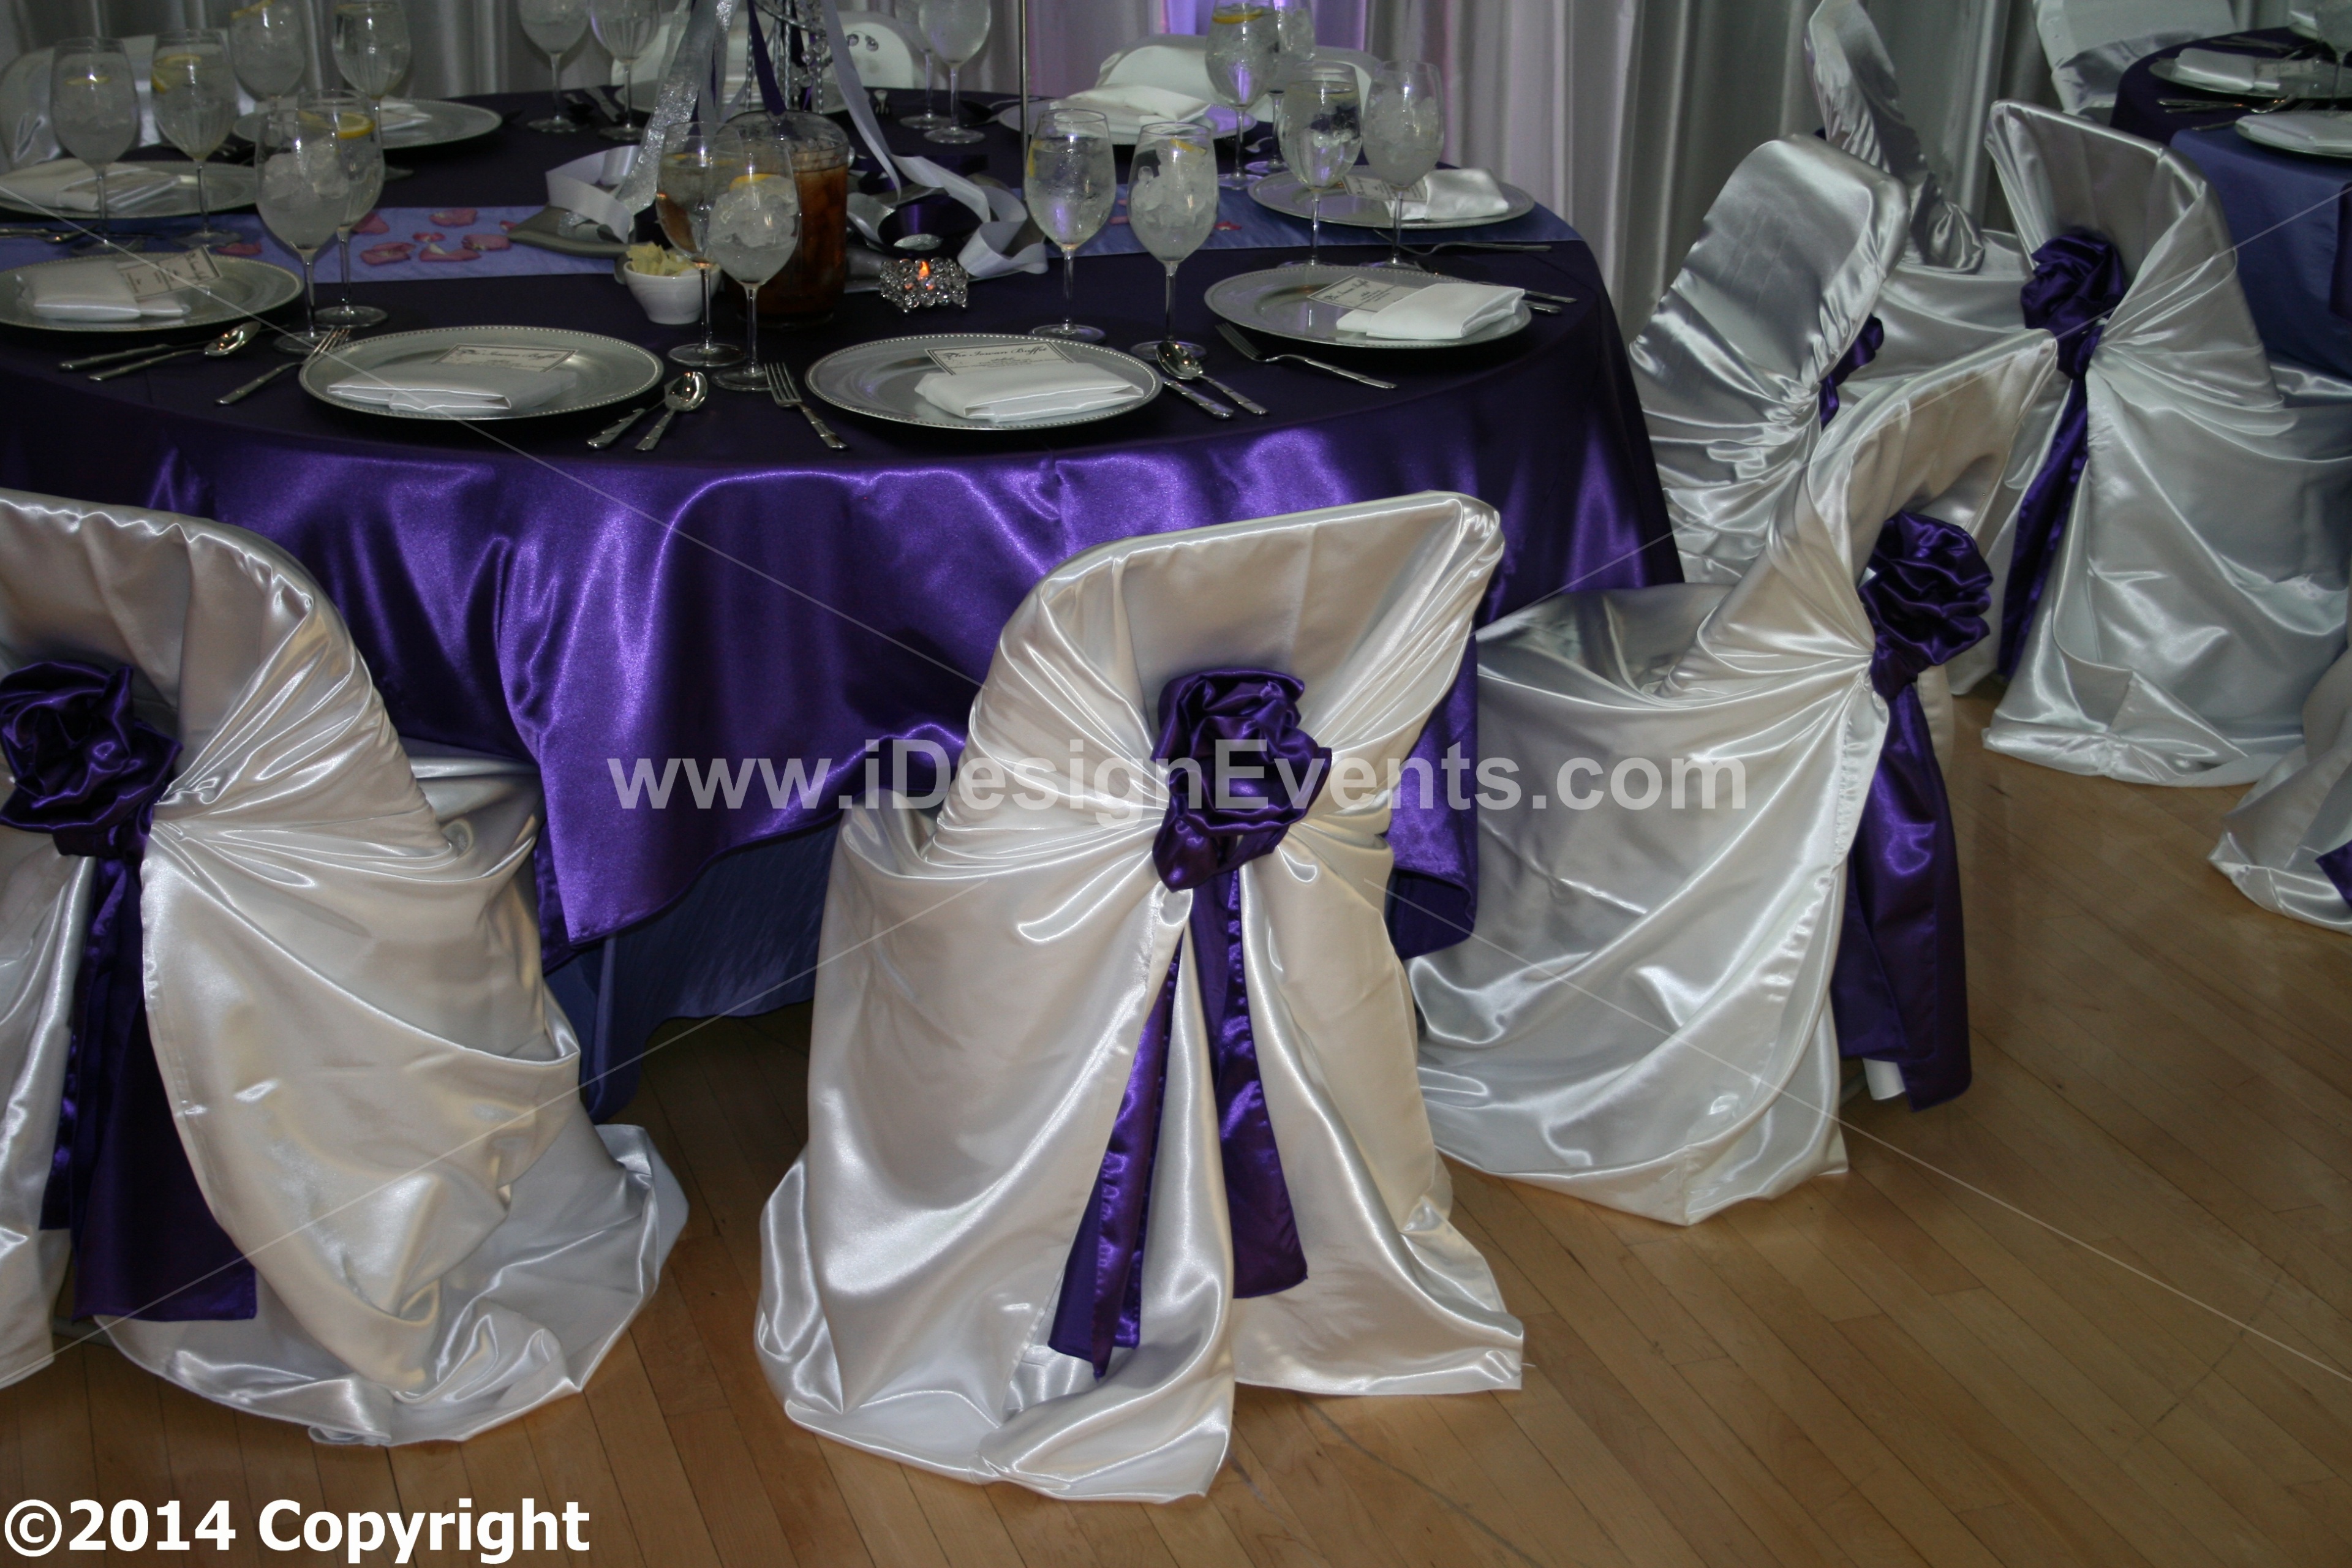 White Satin Universal Pillow Case Self Tie Chair Covers